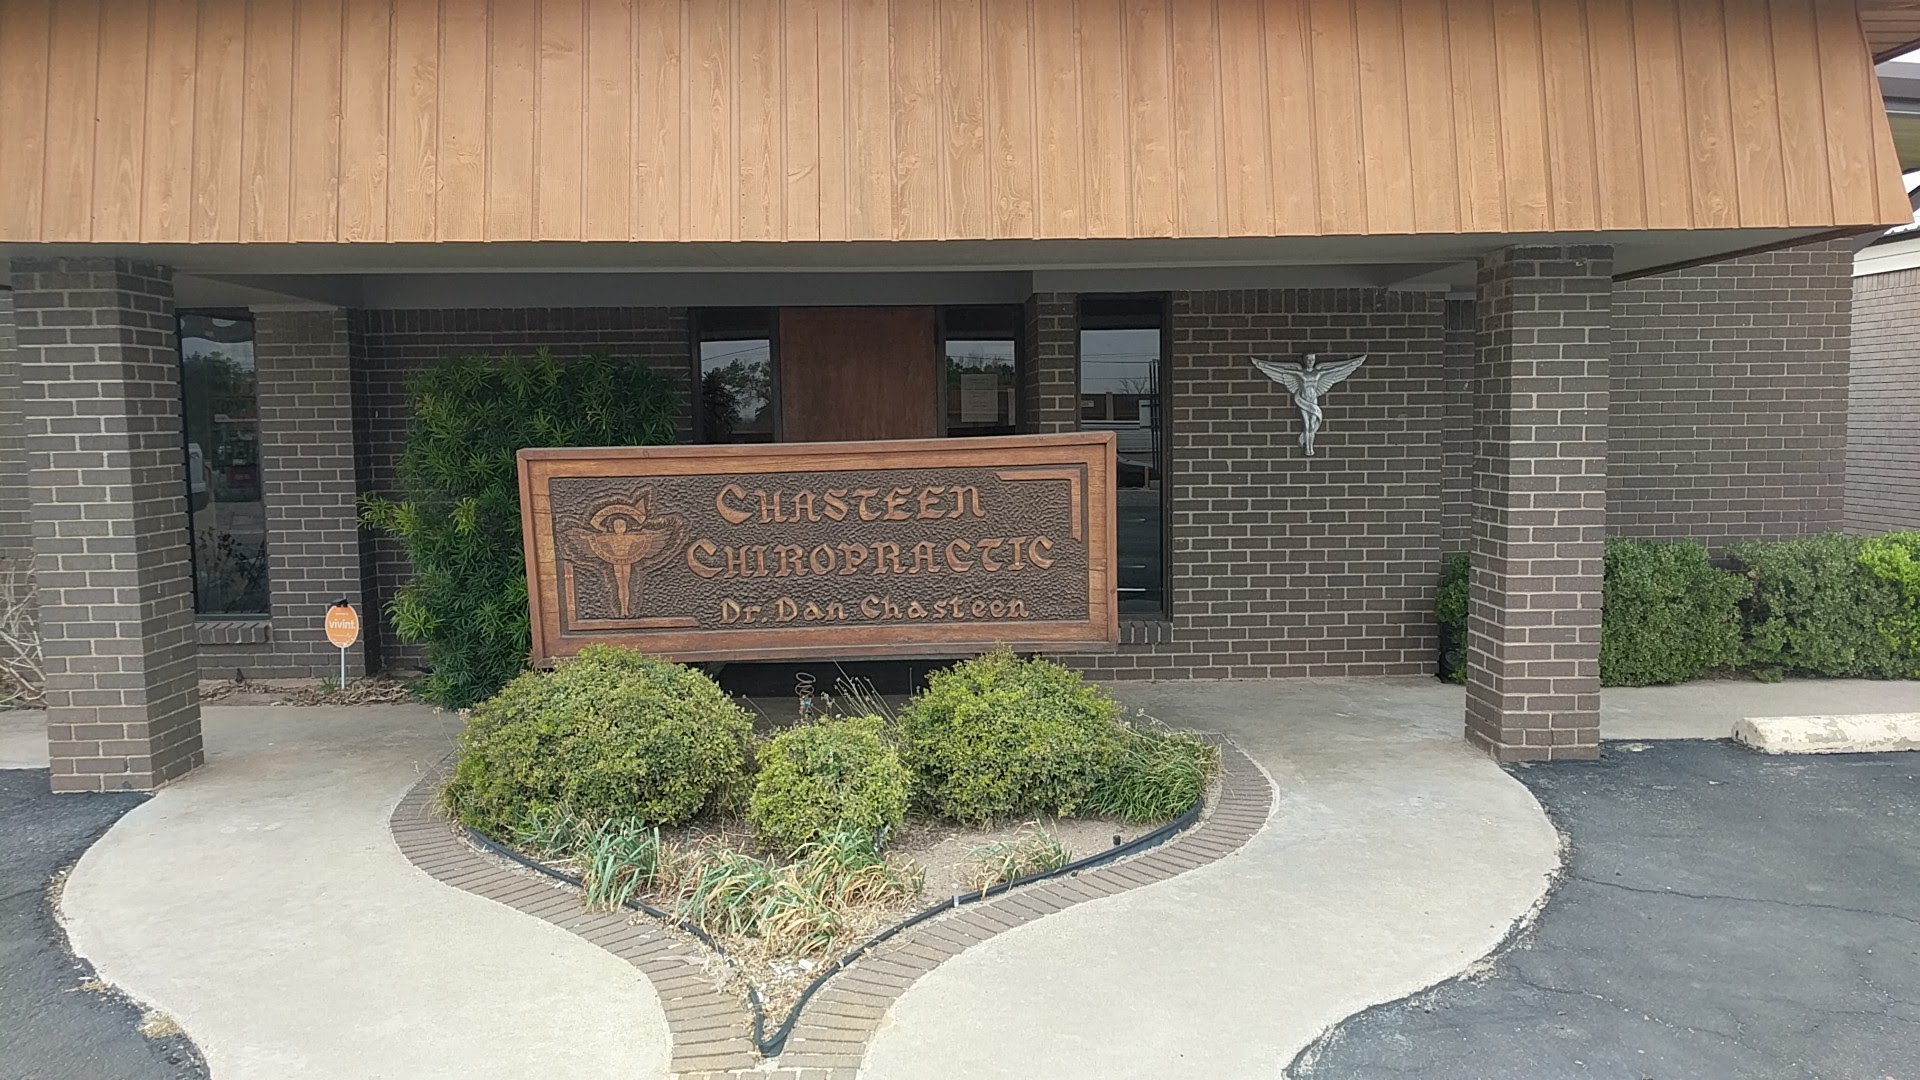 Chasteen Chiropractic 4203 College Ave, Snyder Texas 79549